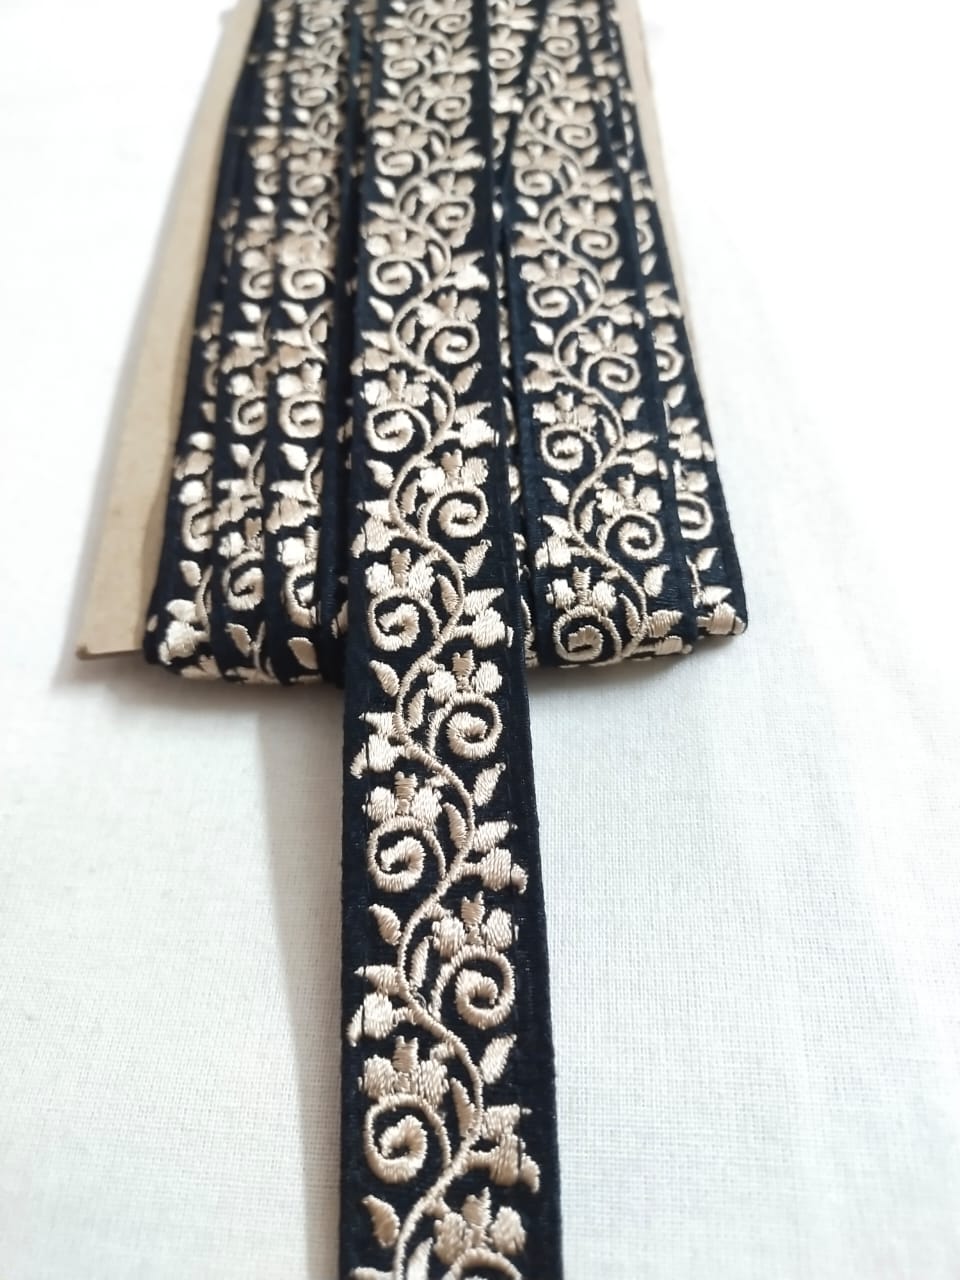 Embroidered trim or fabric trim, for couture sewing and gowns.